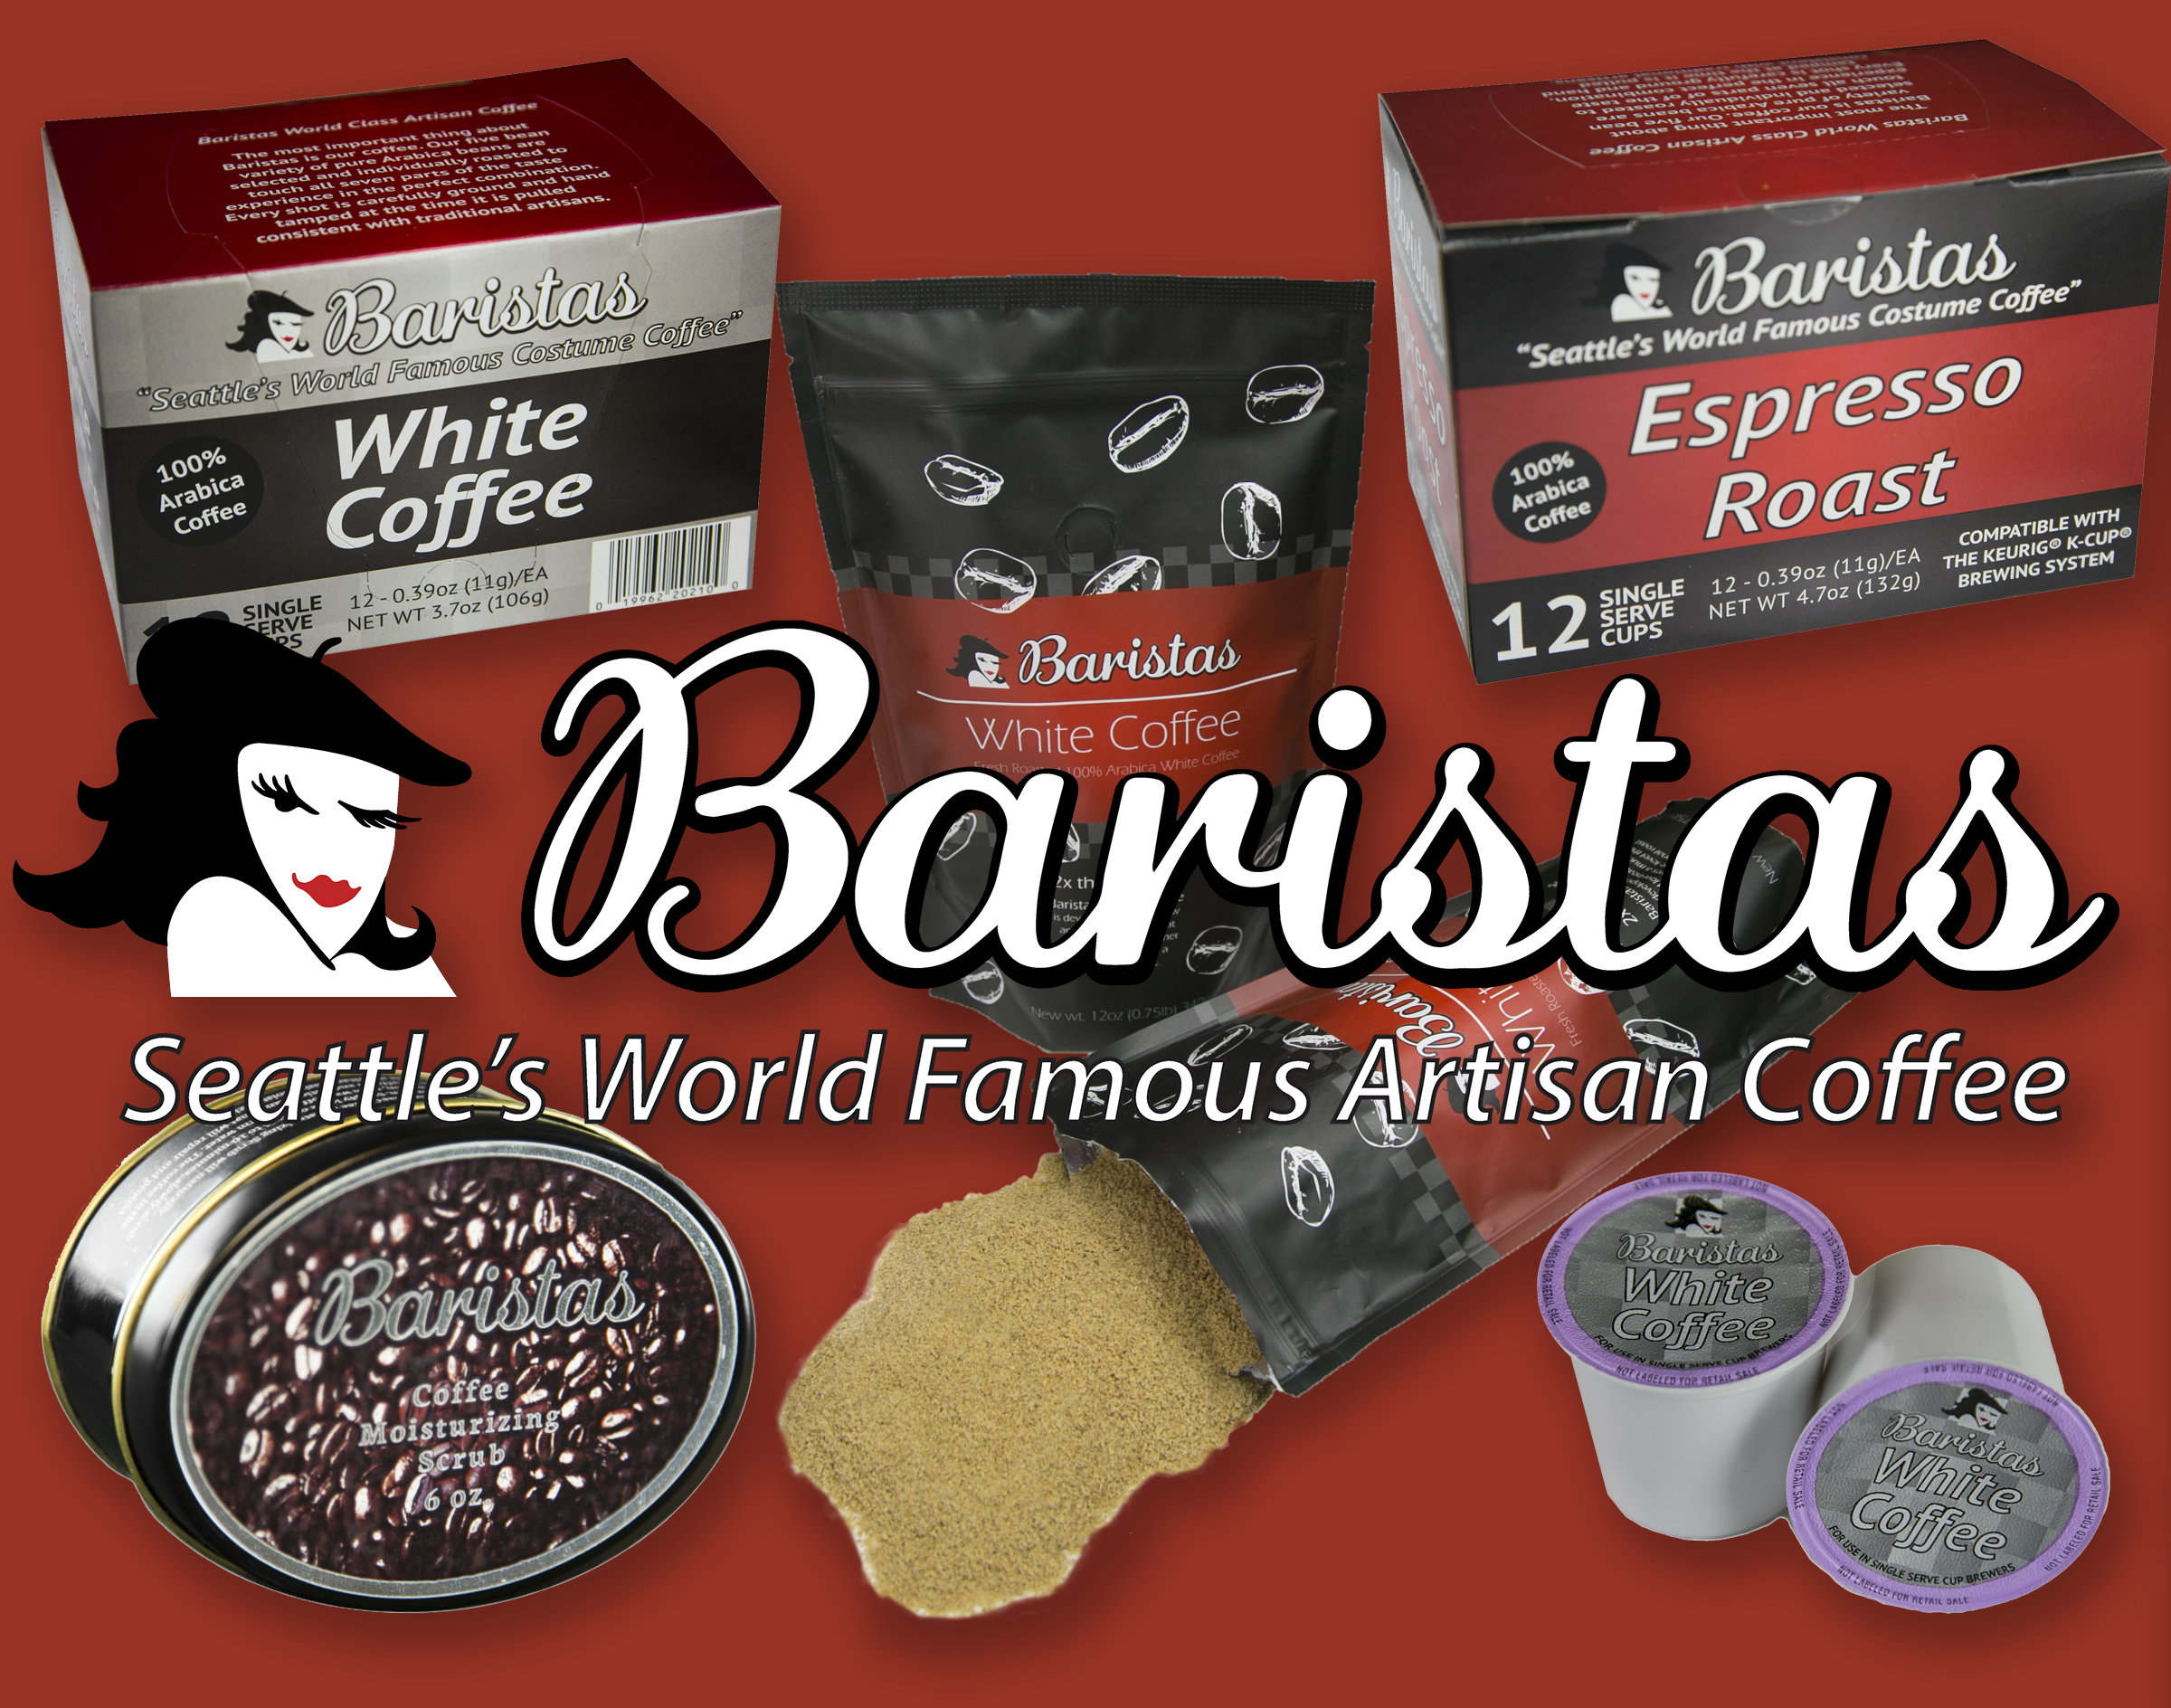 Baristas Coffee Company Inc., Friday, September 27, 2019, Press release picture